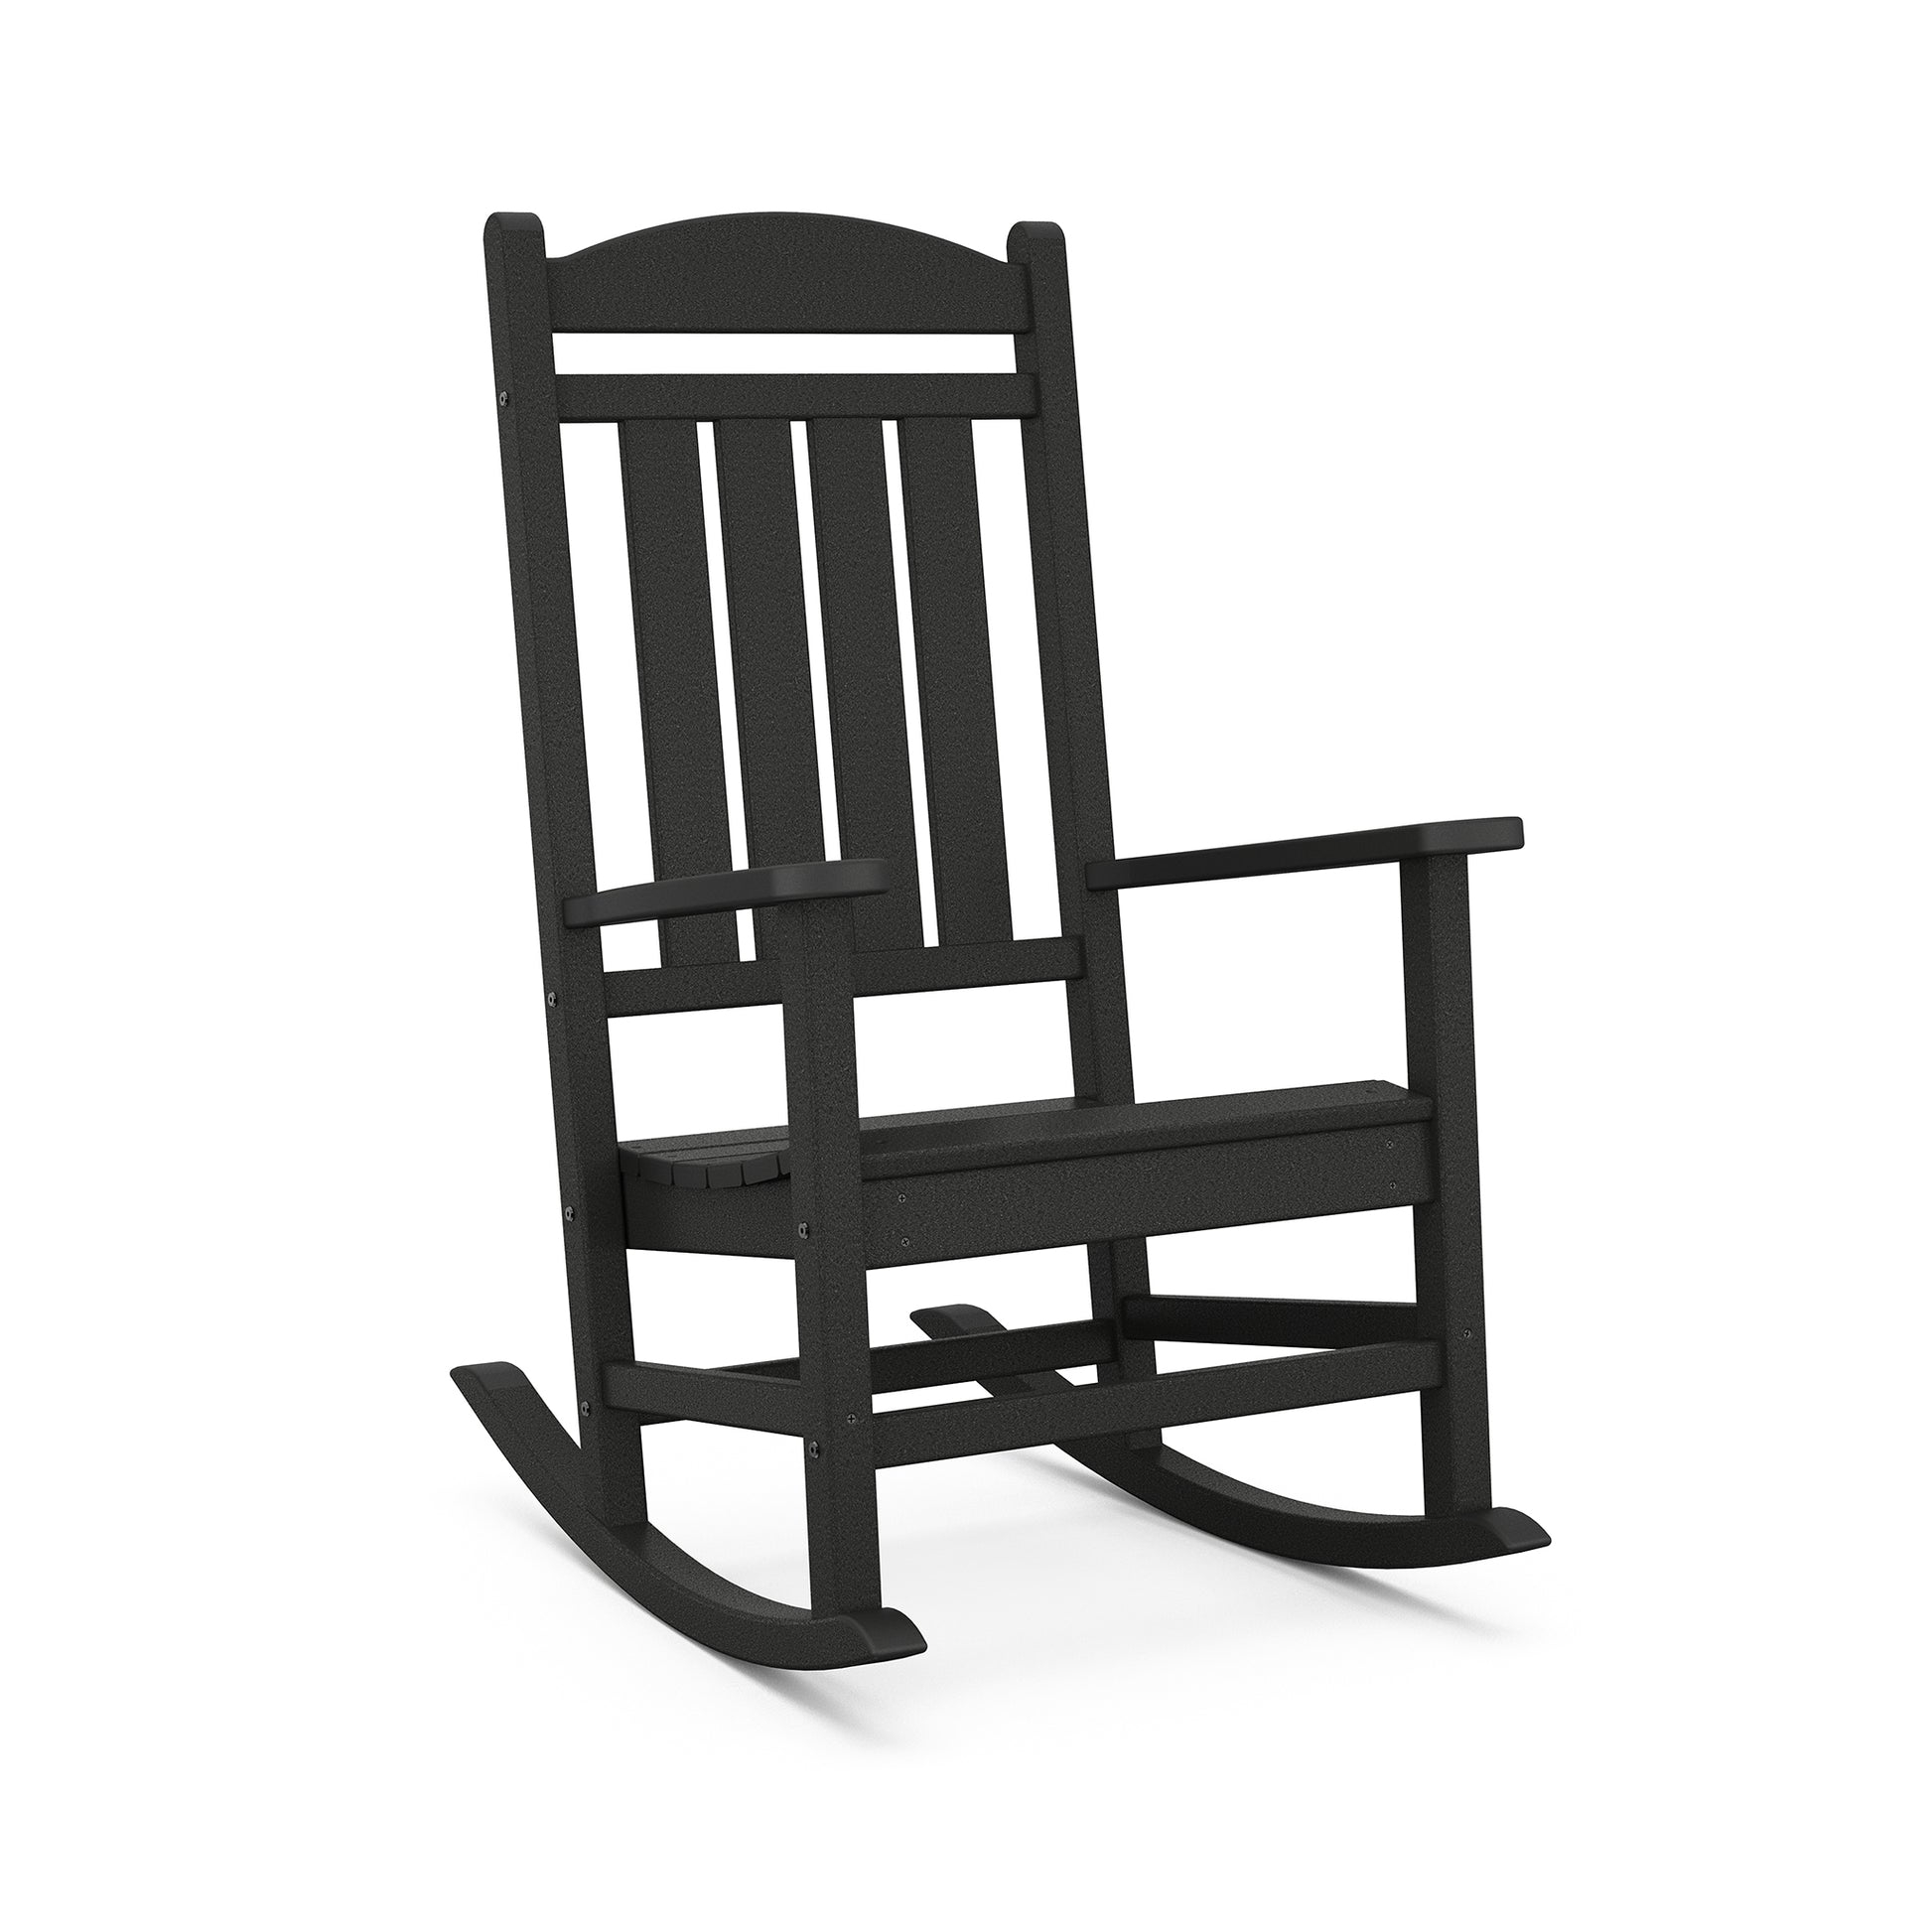 A black POLYWOOD© Presidential Outdoor Rocking Chair with a vertical slat back and a flat seat, viewed against a plain white background. The chair has curved rockers and armrests.